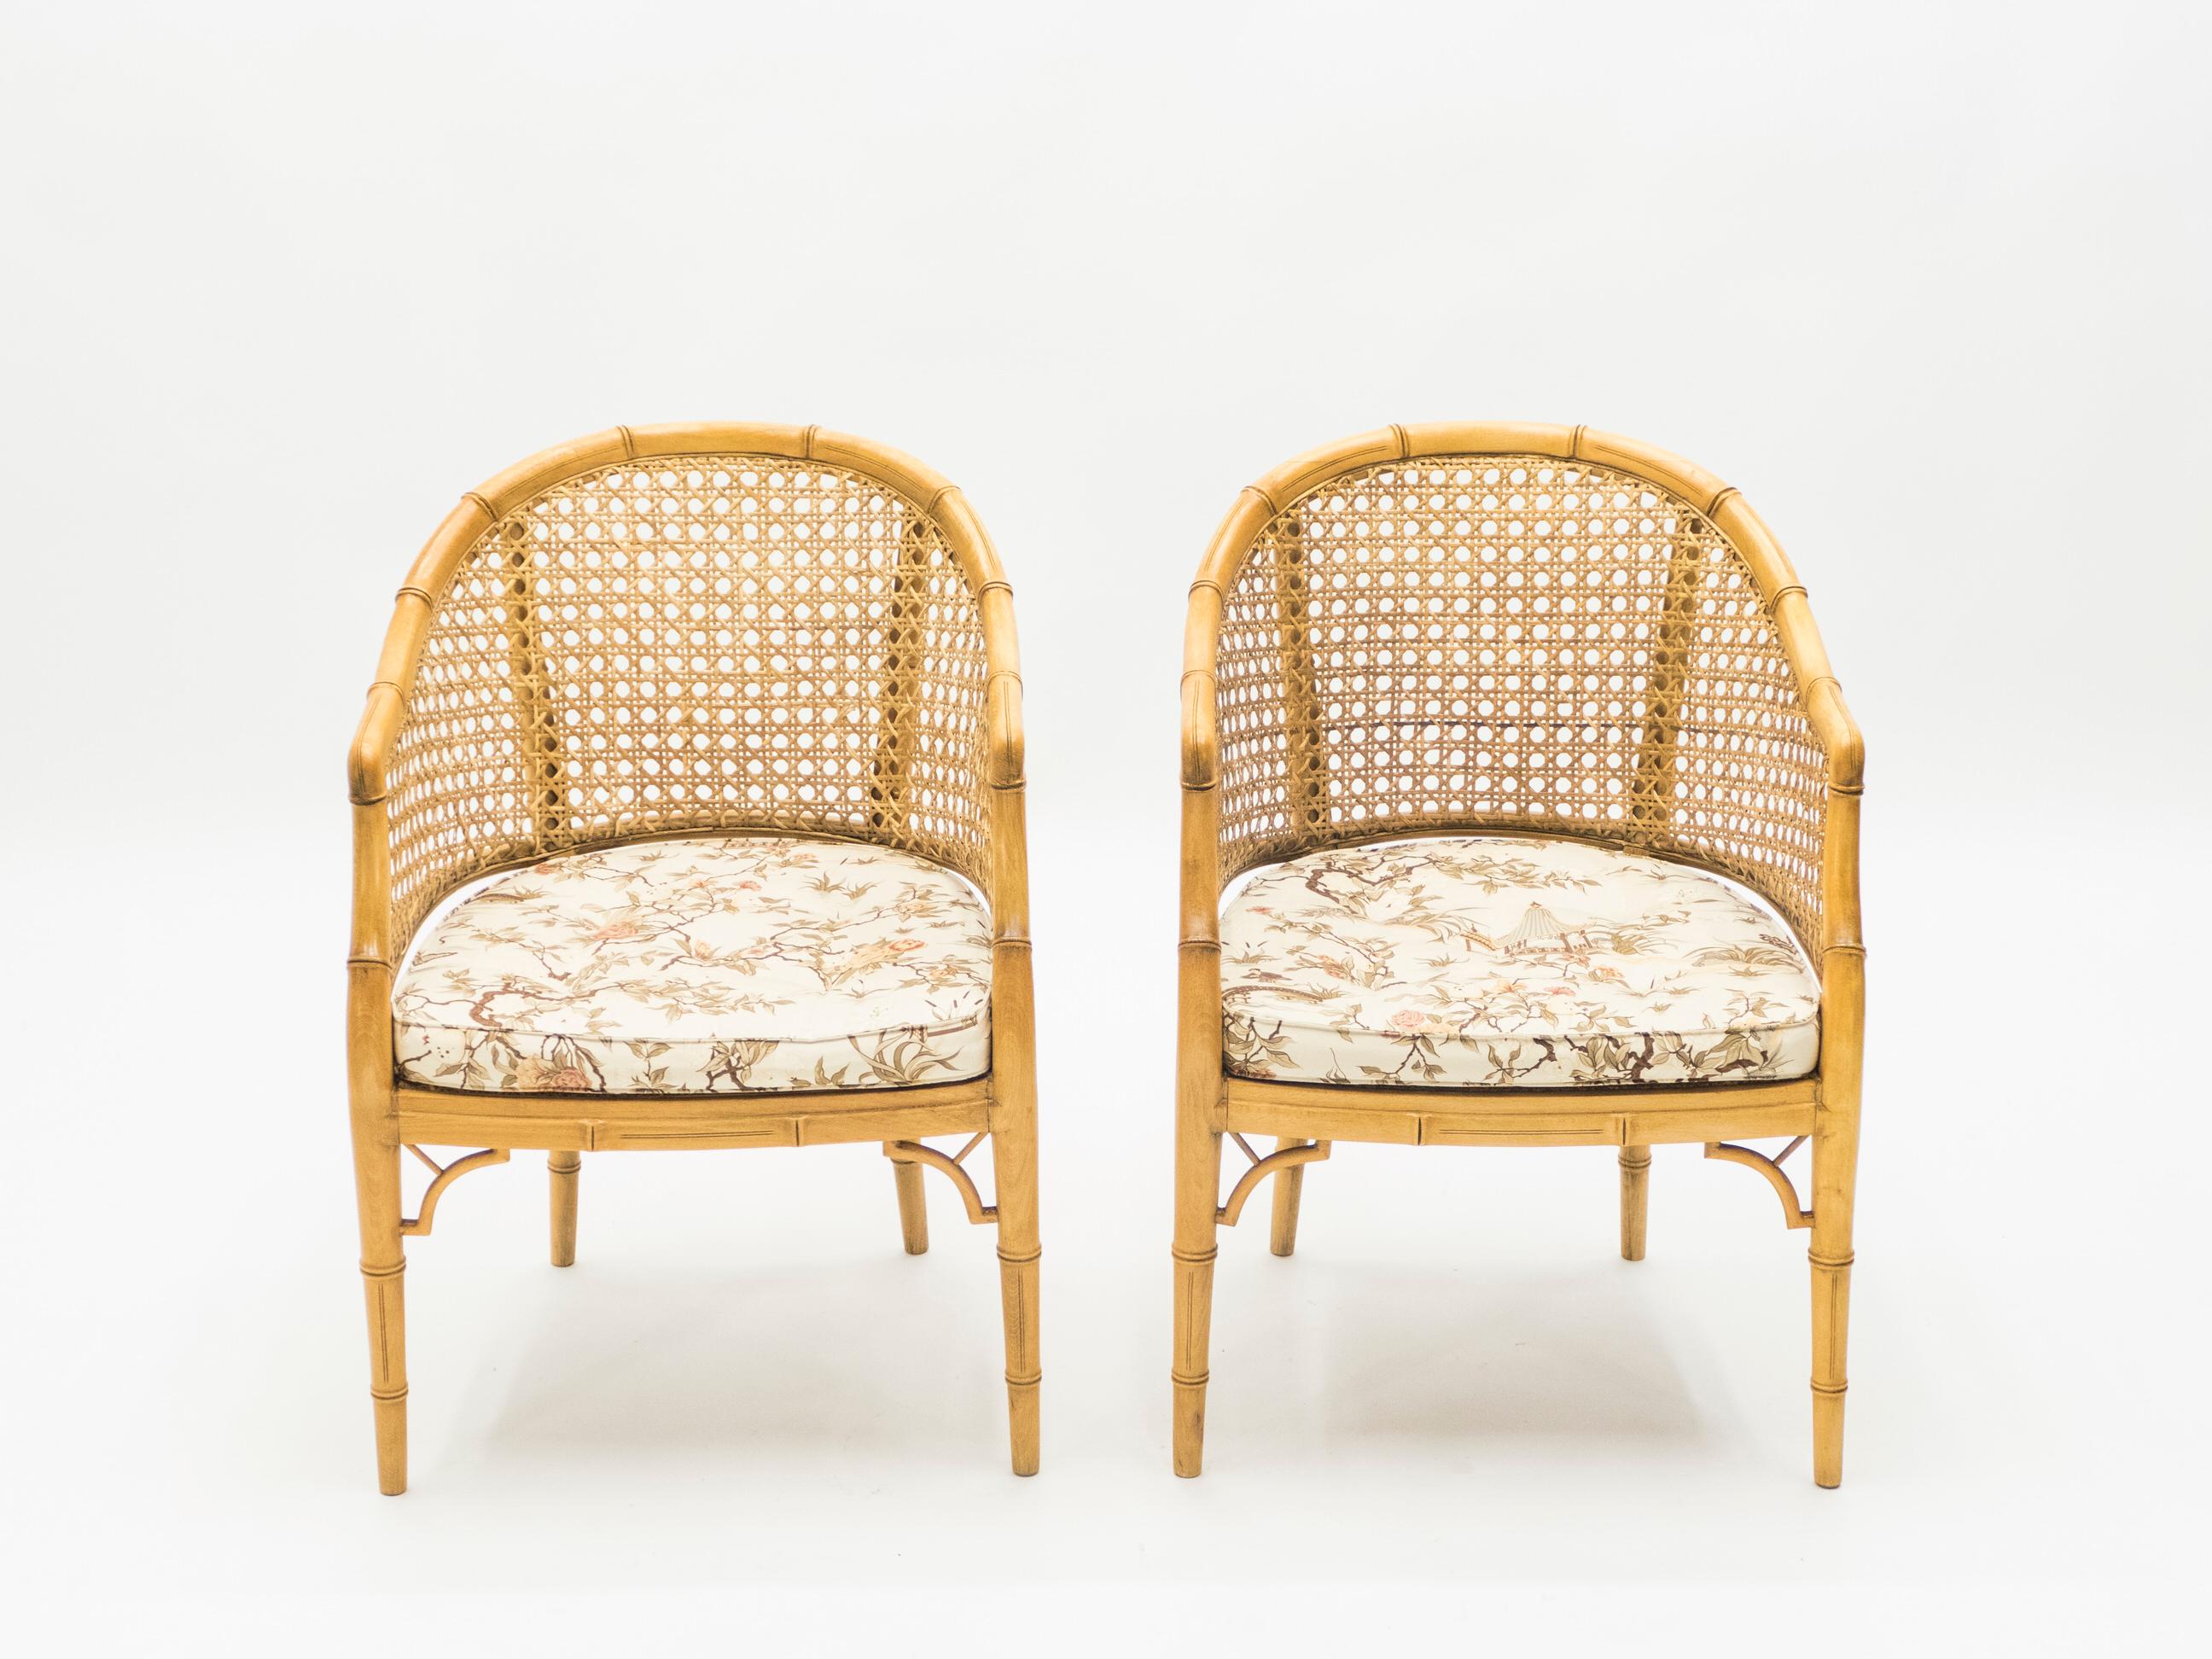 This pair of bamboo armchairs from the Mid-Century Modern French Riviera period is bursting with nostalgia. A light golden bamboo structure, cane seat, and the original printed cushions would feel right at home in a stylish vacation house by the